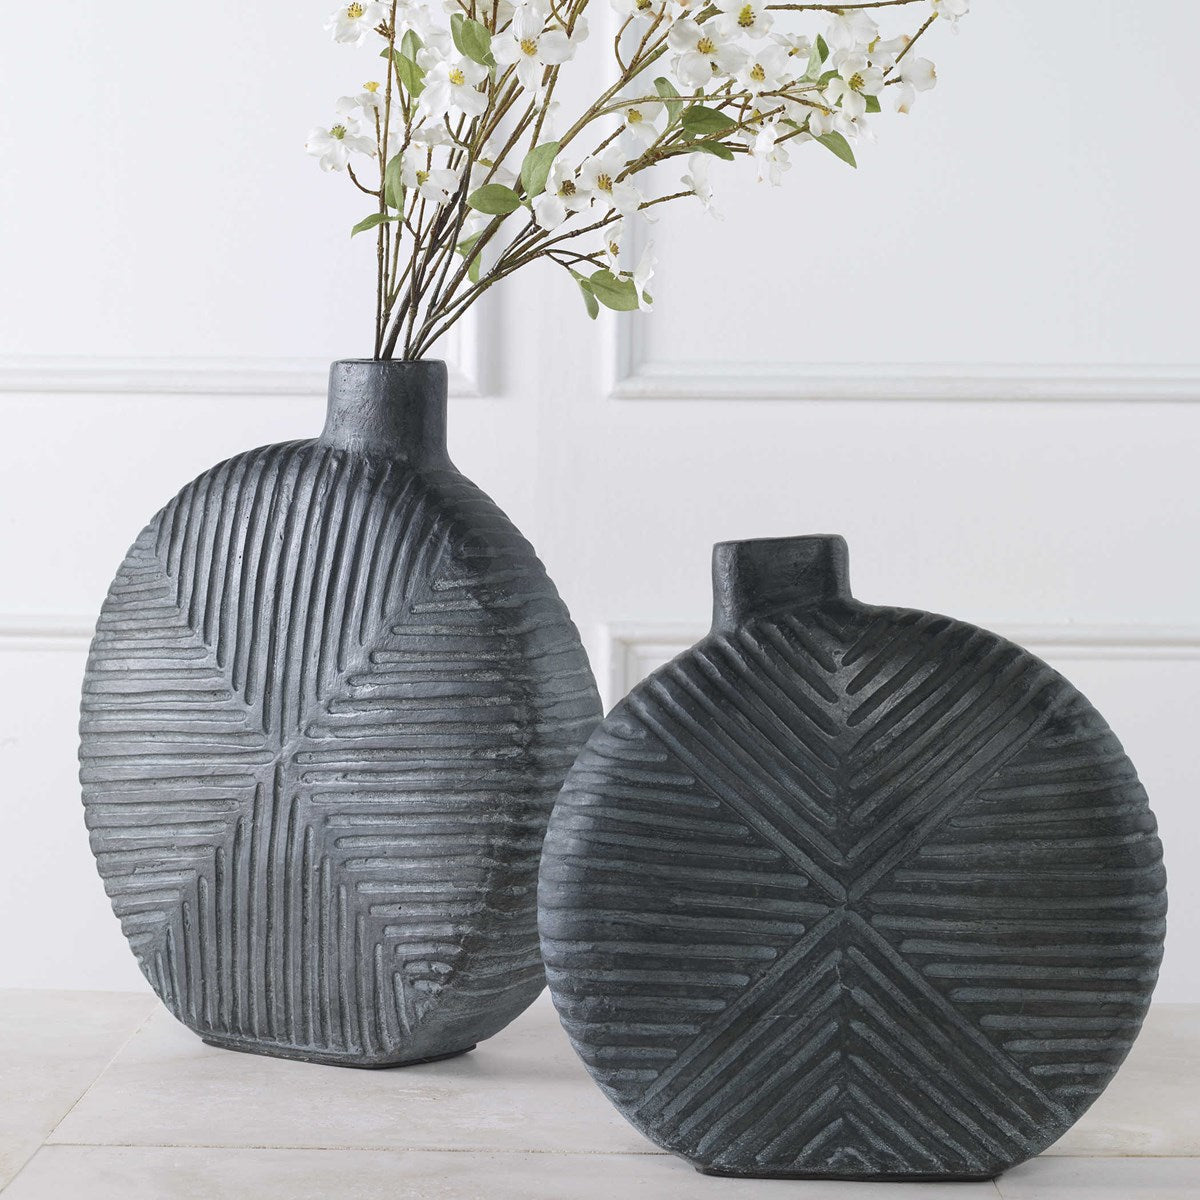 Viewpoint Vases